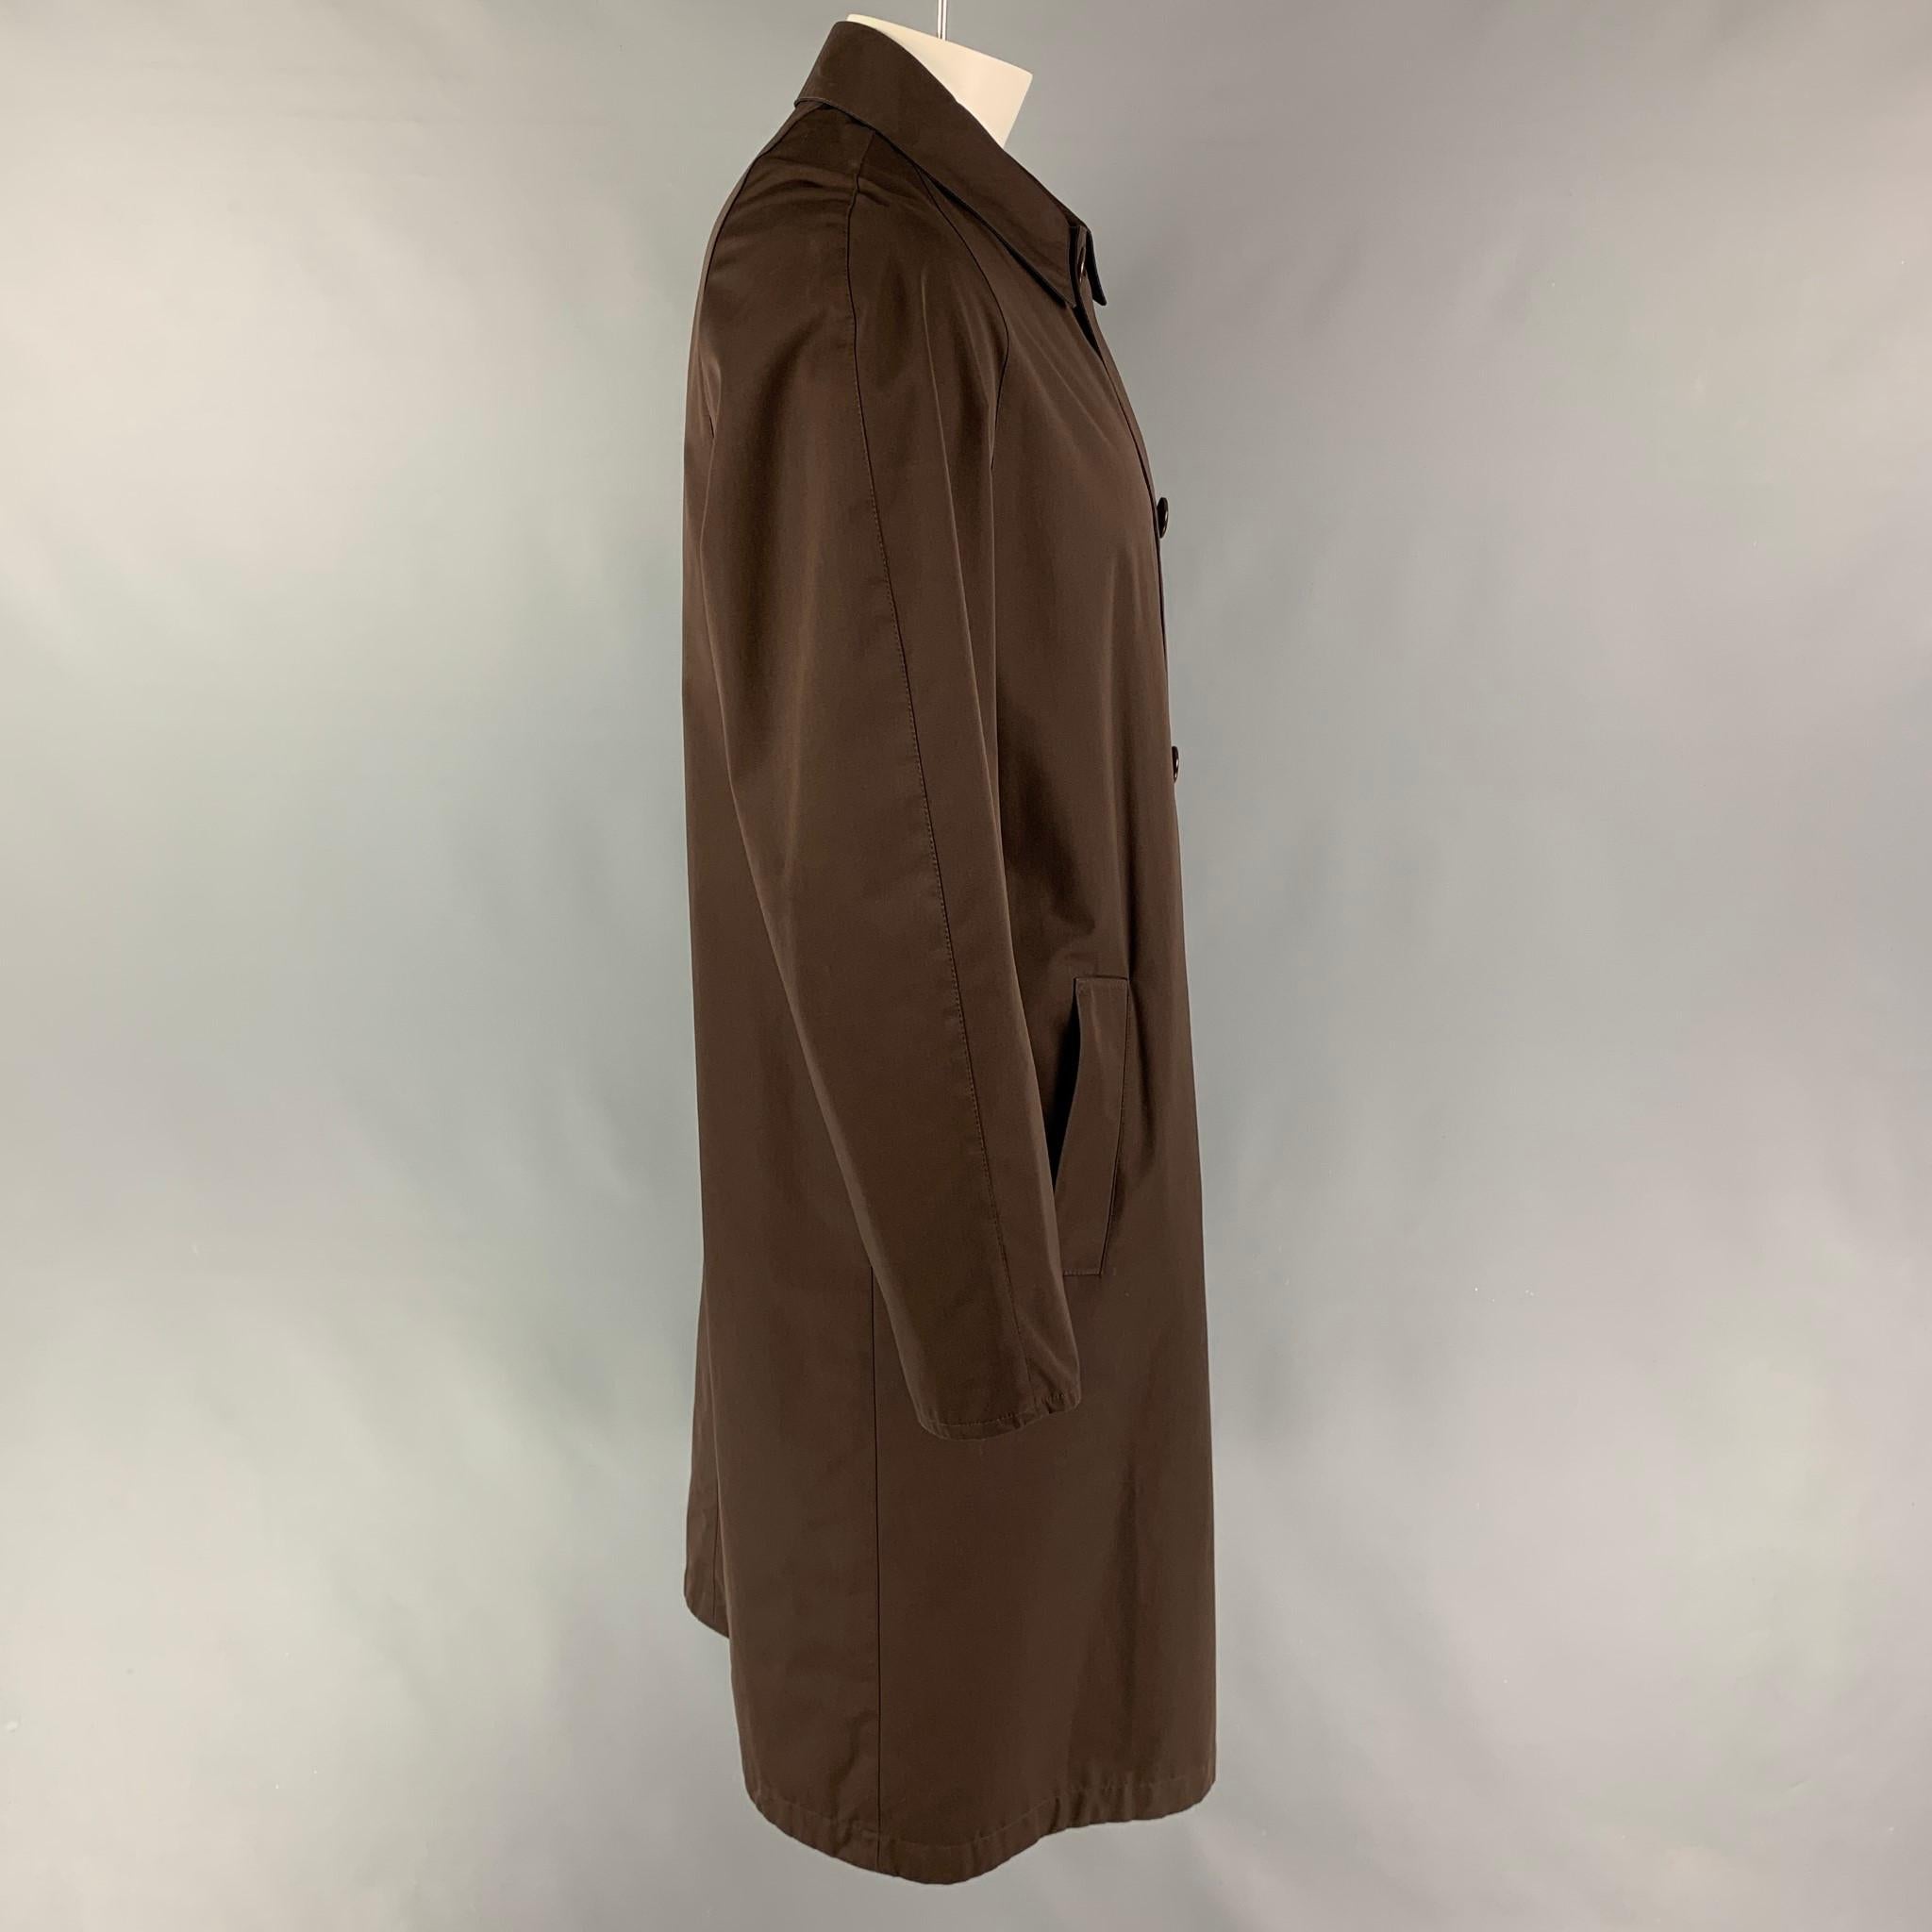 KITON coat comes in a brown & navy cotton blend featuring a reversible style, slit pockets, spread collar, and a hidden placket closure. Made in Italy. 

Very Good Pre-Owned Condition.
Marked: 52

Measurements:

Shoulder: 18 in.
Chest: 44